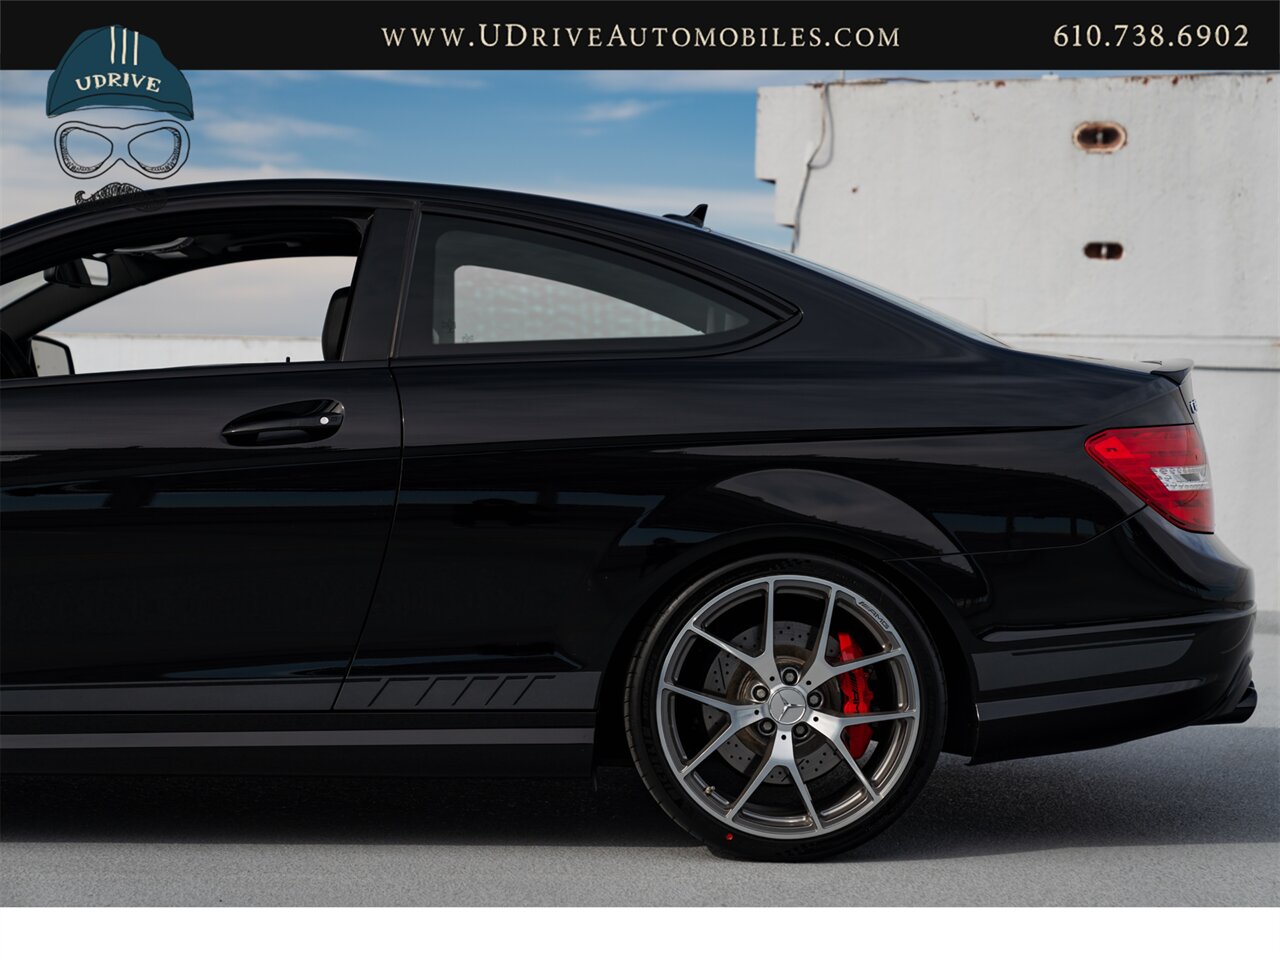 2015 Mercedes-Benz C63 AMG  Edition 507 17k Miles Pano Sunroof Locking Diff 507hp - Photo 24 - West Chester, PA 19382